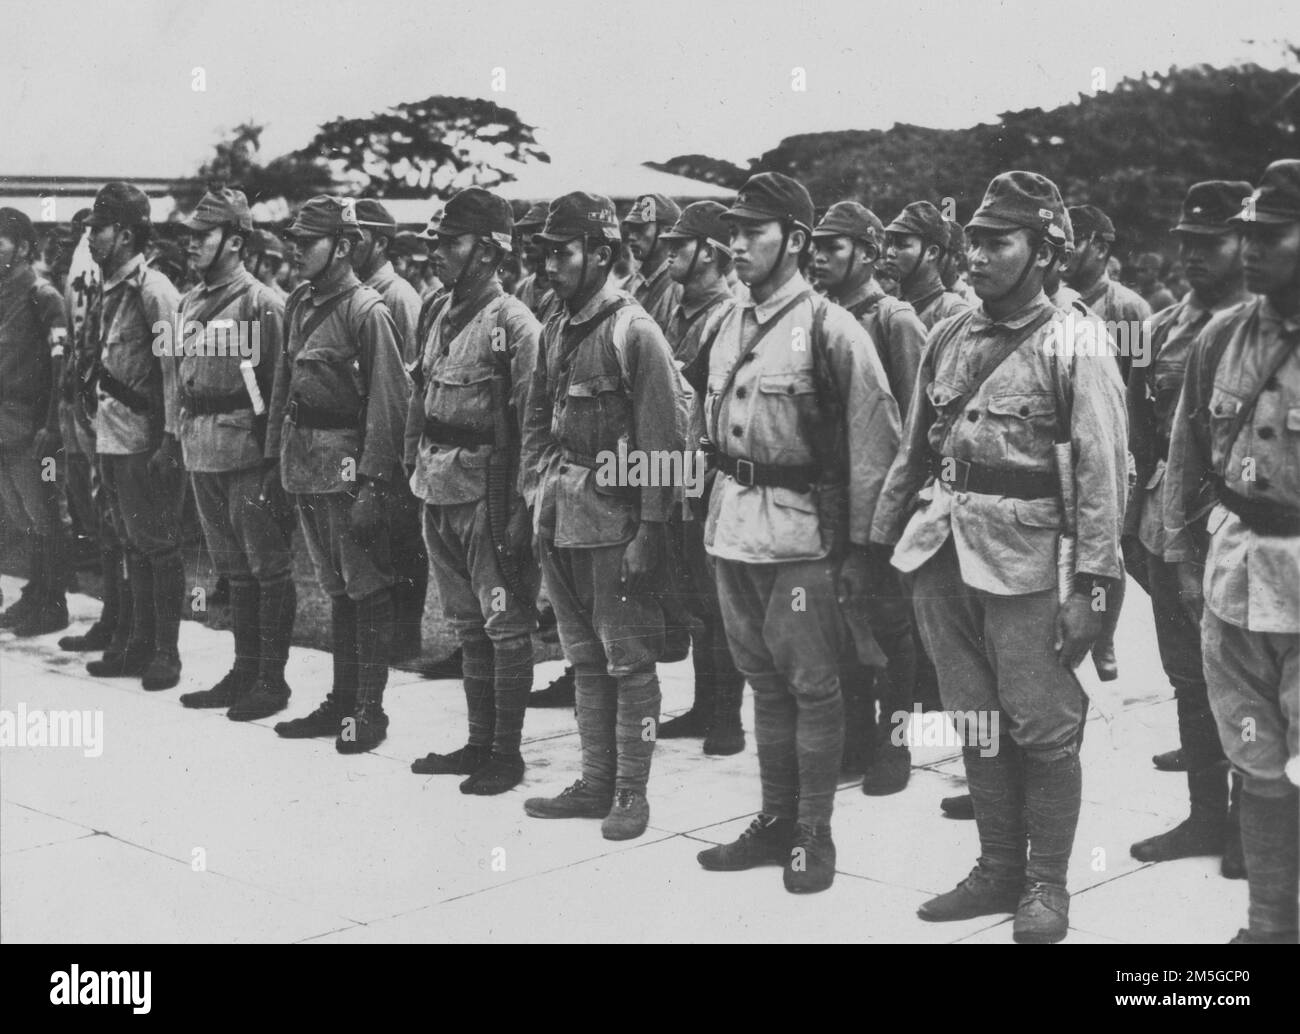 Pacific War, 1941-1945. Taiwanese aborigine volunteers in the Imperial Japanese Army known as the Takasago Volunteers (高砂義勇隊) attend an award ceremony in recognition for their distinguished service in New Guinea, February 1944. Note the traditional Taiwanese service knives affixed to their belts. The Takasago Volunteers were known for their aptitude in jungle warfare, serving with distinction in a variety of supportive and frontline combat roles during the Pacific War. Stock Photo